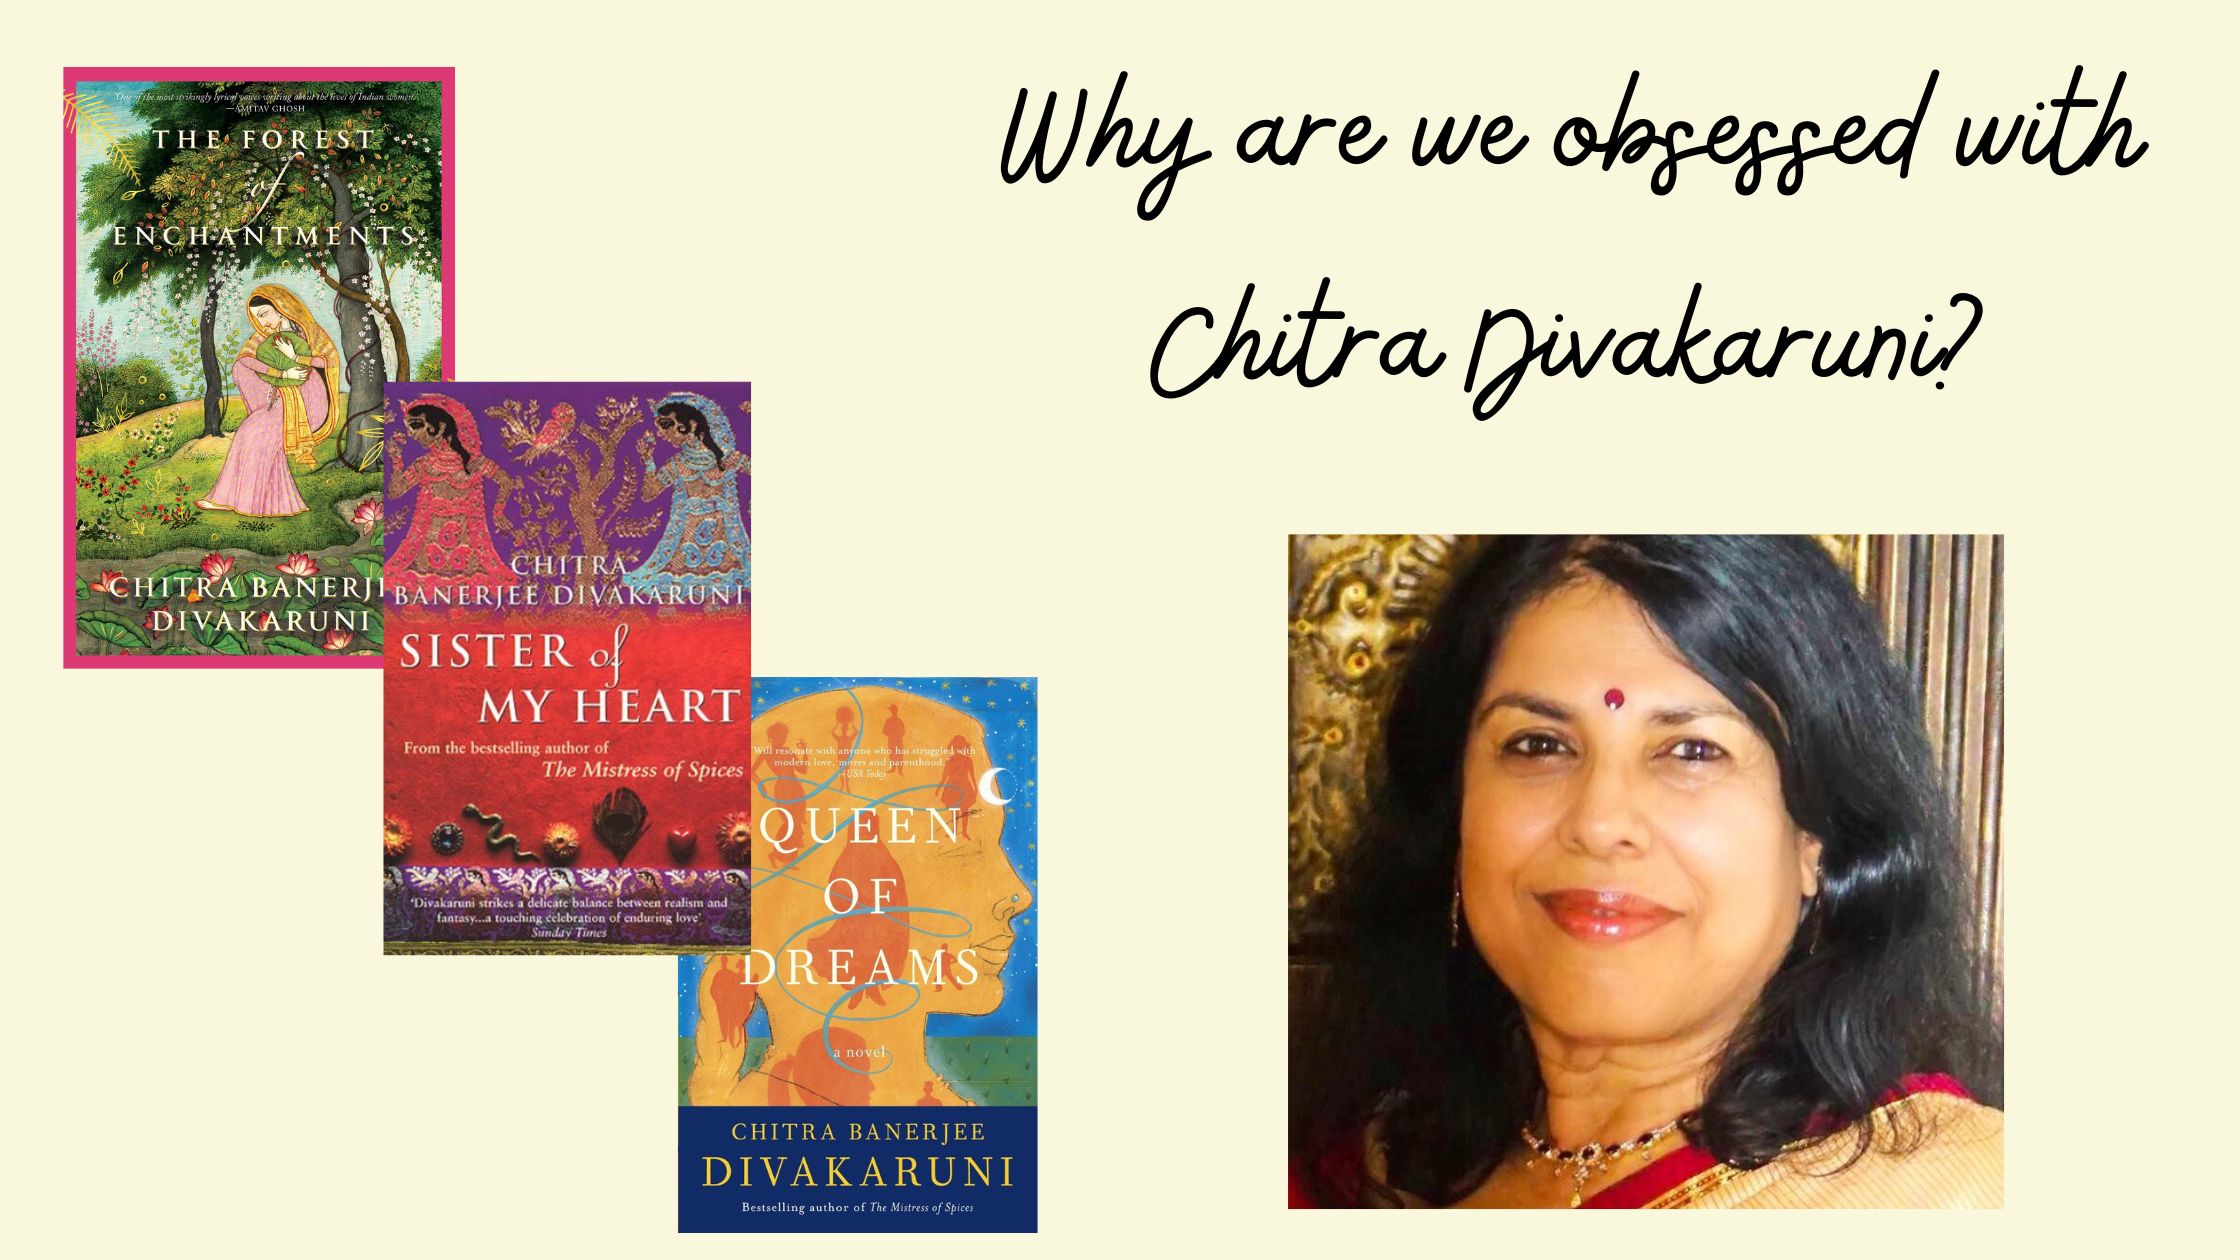 Why are we obsessed with Chitra Divakaruni?